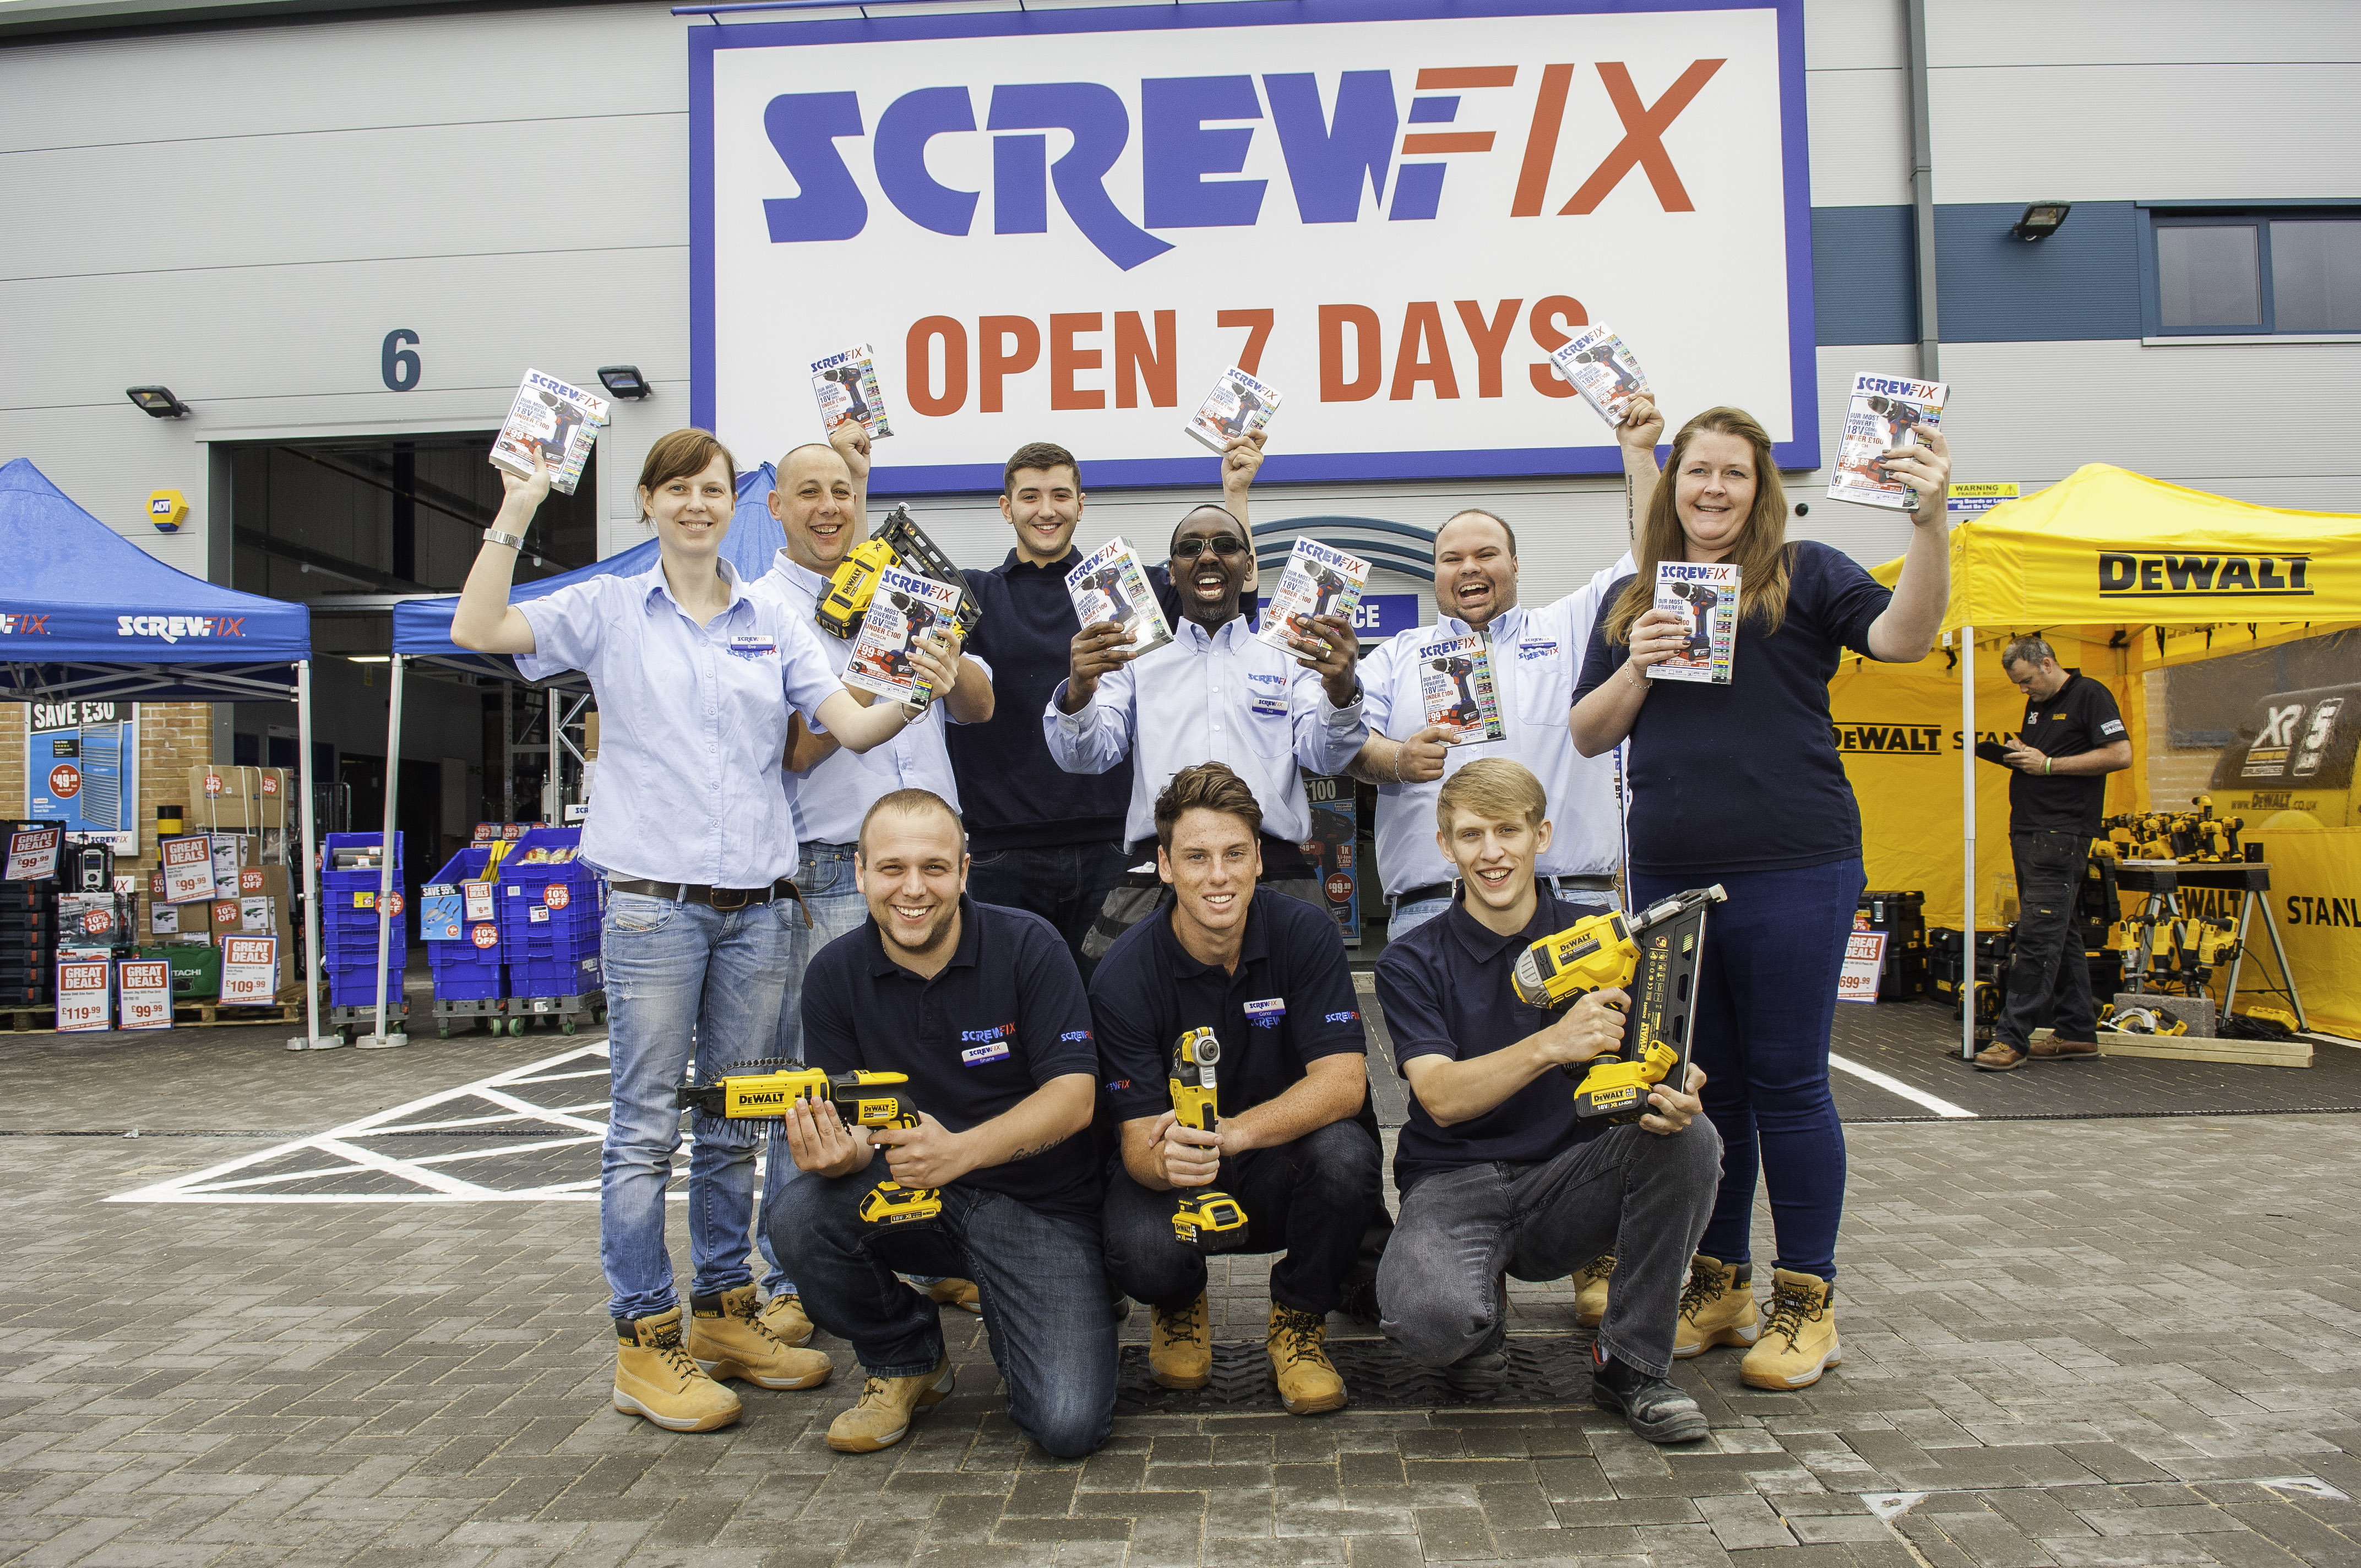 Redhill’s first Screwfix store is declared a runaway success